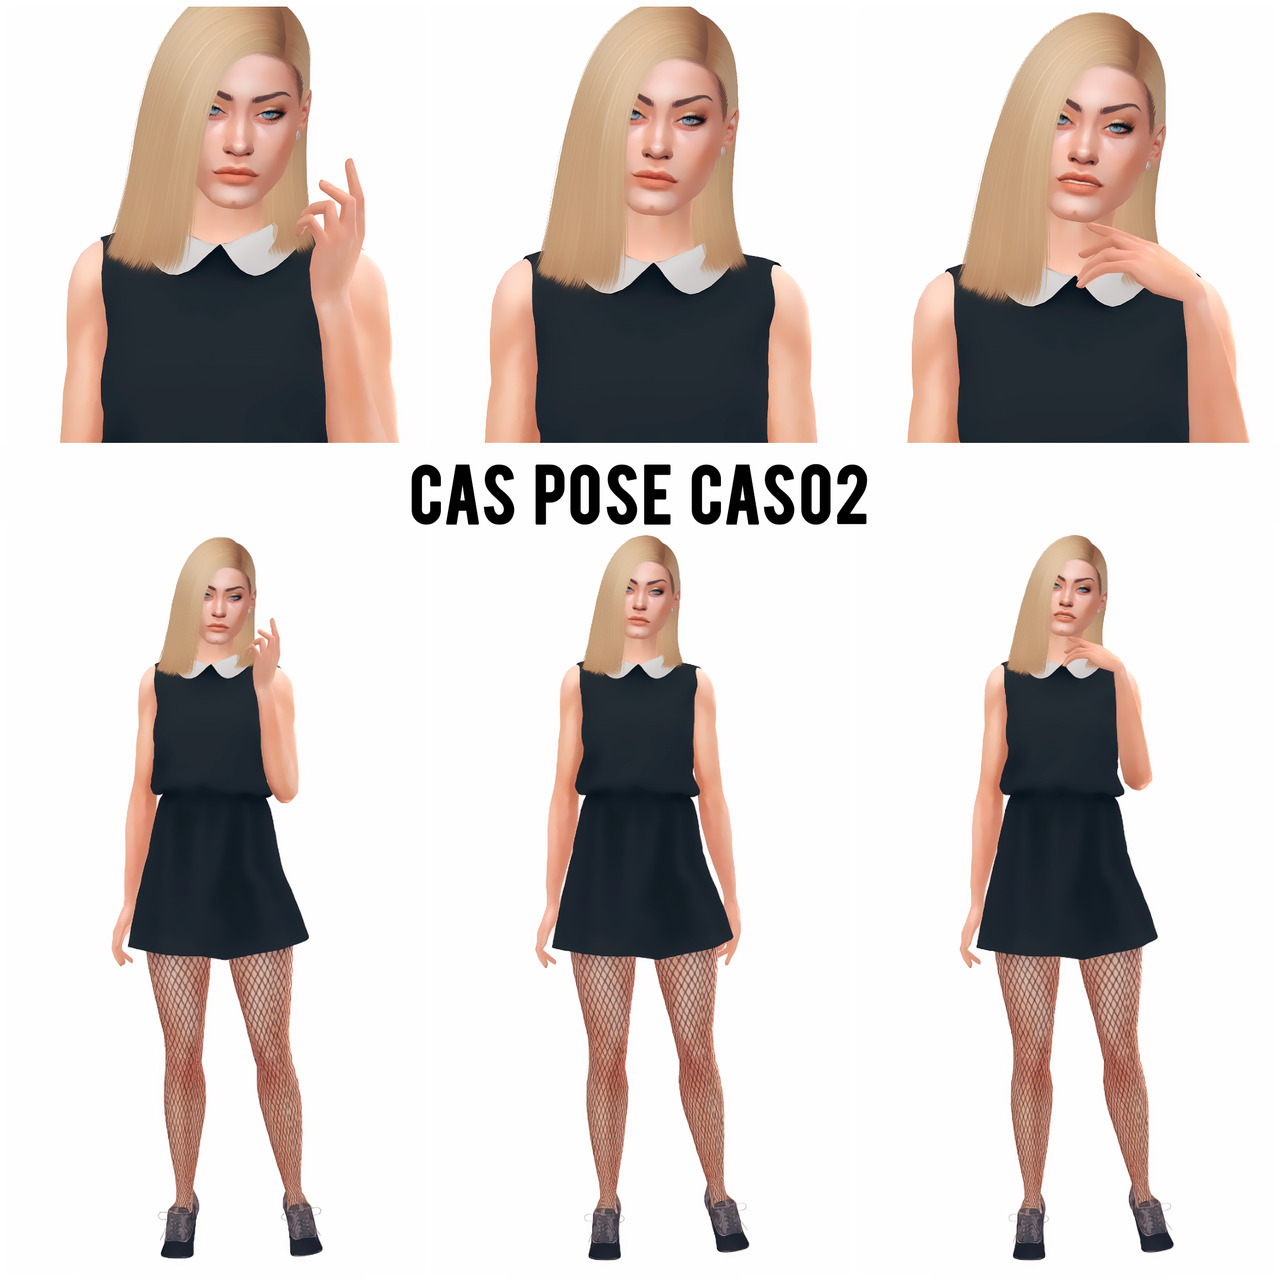 Sims 4 Pose Pack Cas